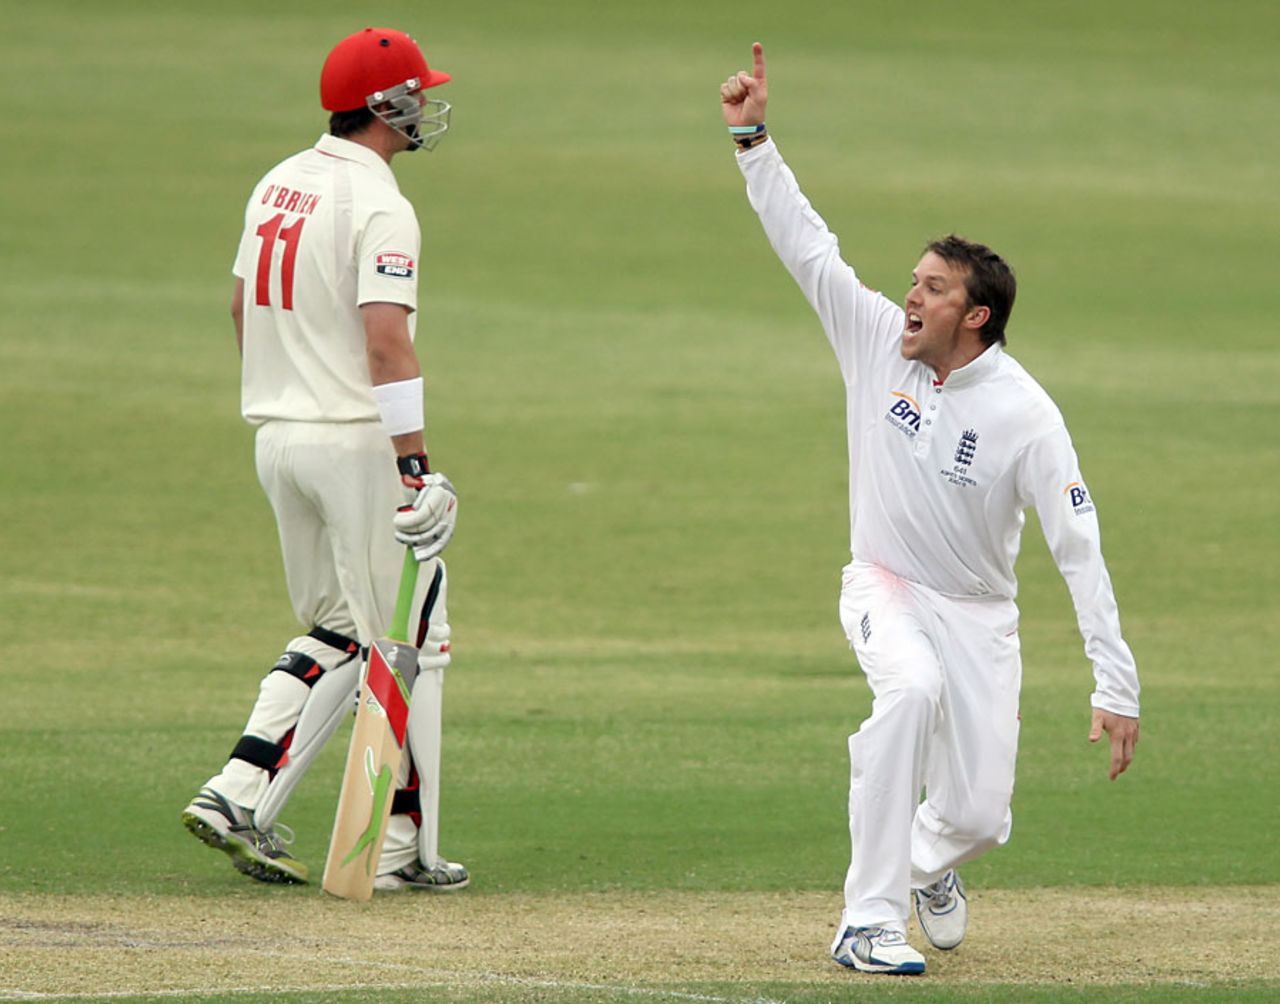 Graeme Swann again impressed with another four-wicket haul, South Australia v England, Adelaide, 2nd day, November 12, 2010